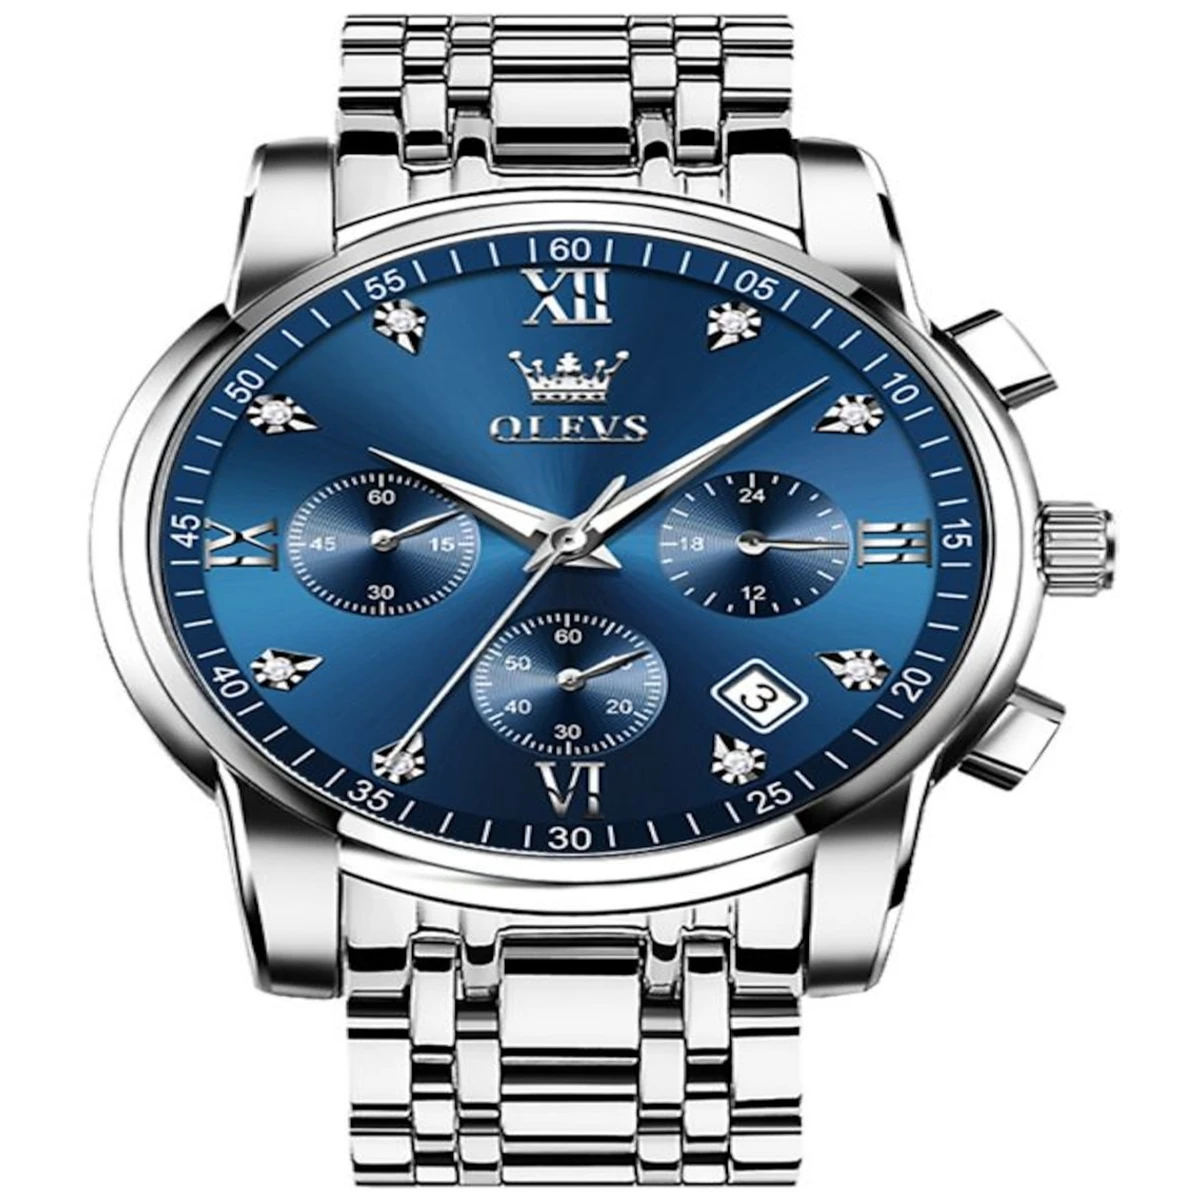 OLEVS MODEL 2858 Watch for Men Stainless Steel Watches - 2858 Silver chain Dial Blue Cooler - MAN WATCH